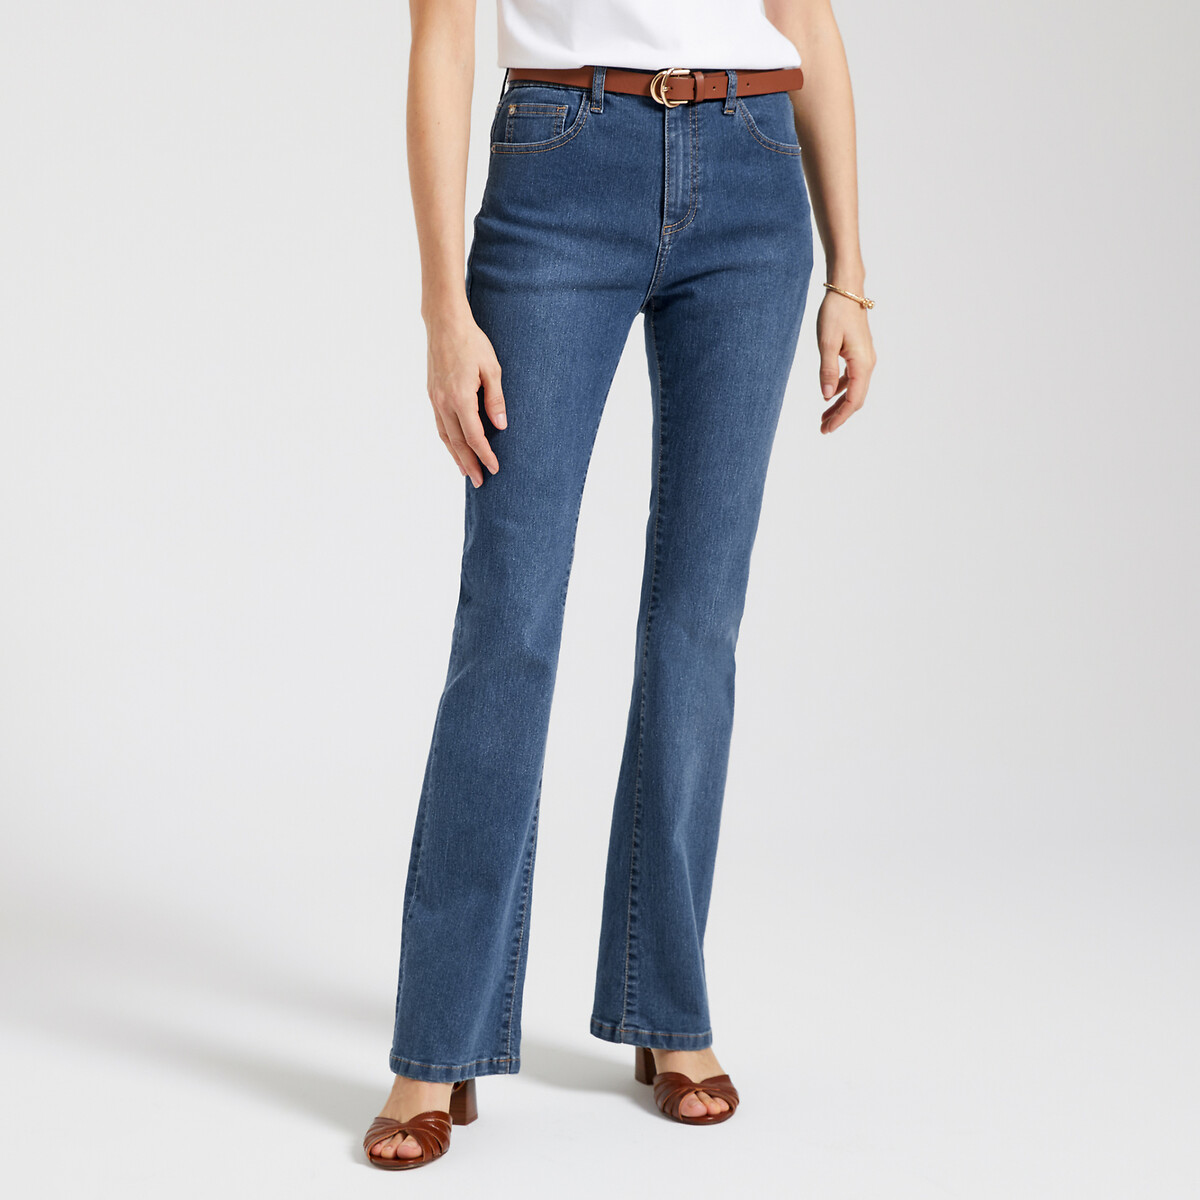 Image of Bootcut Jeans, Length 30.5"